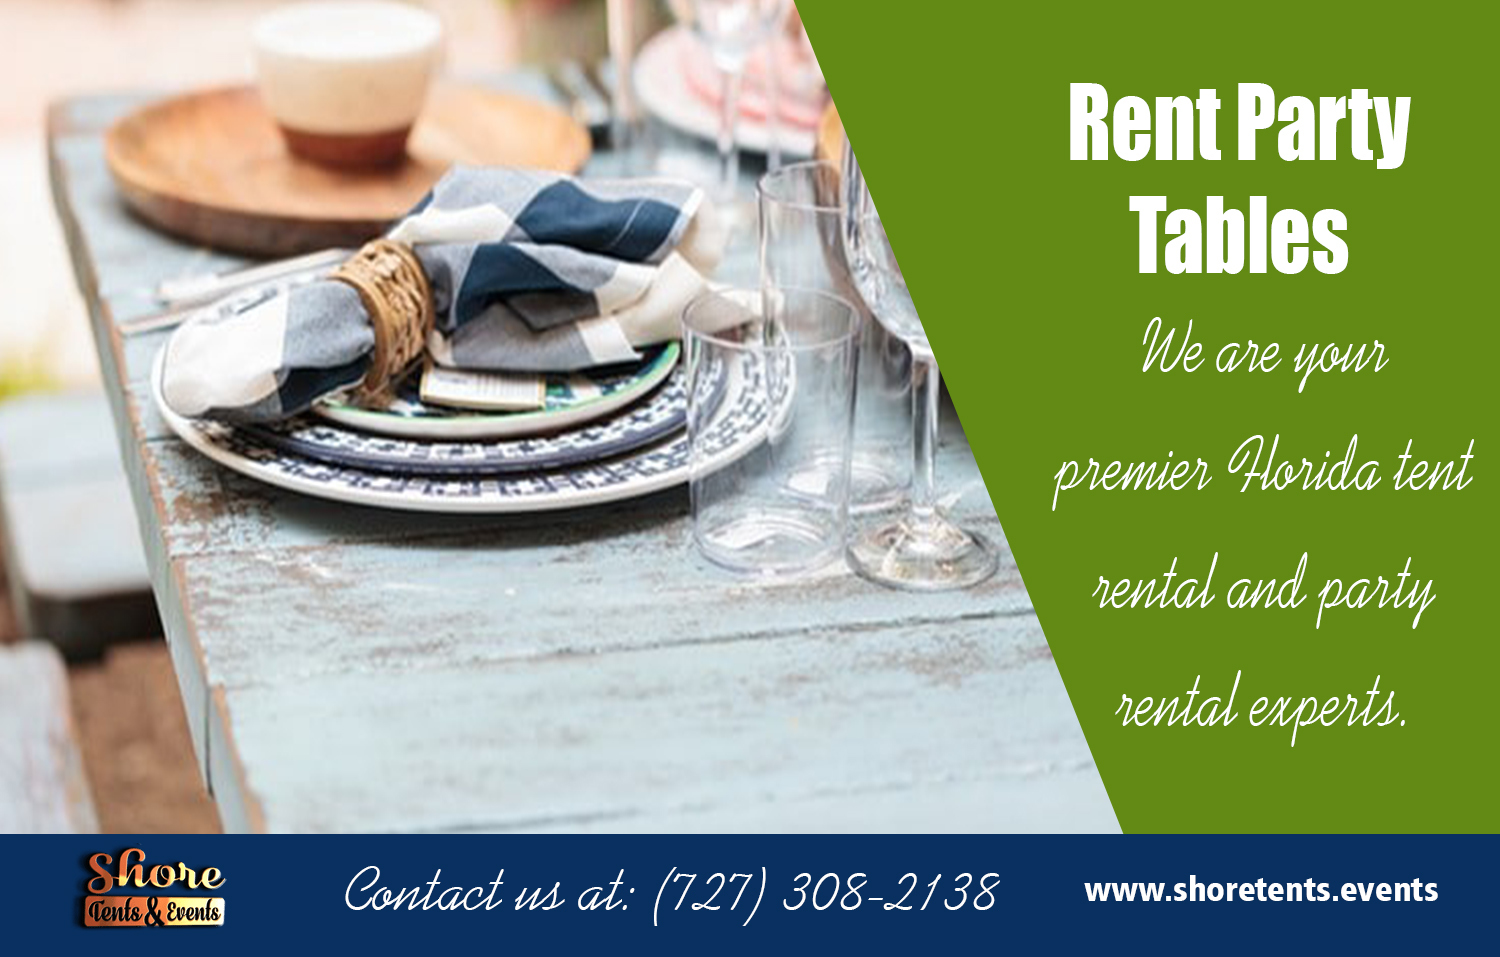 Rent Party Tables